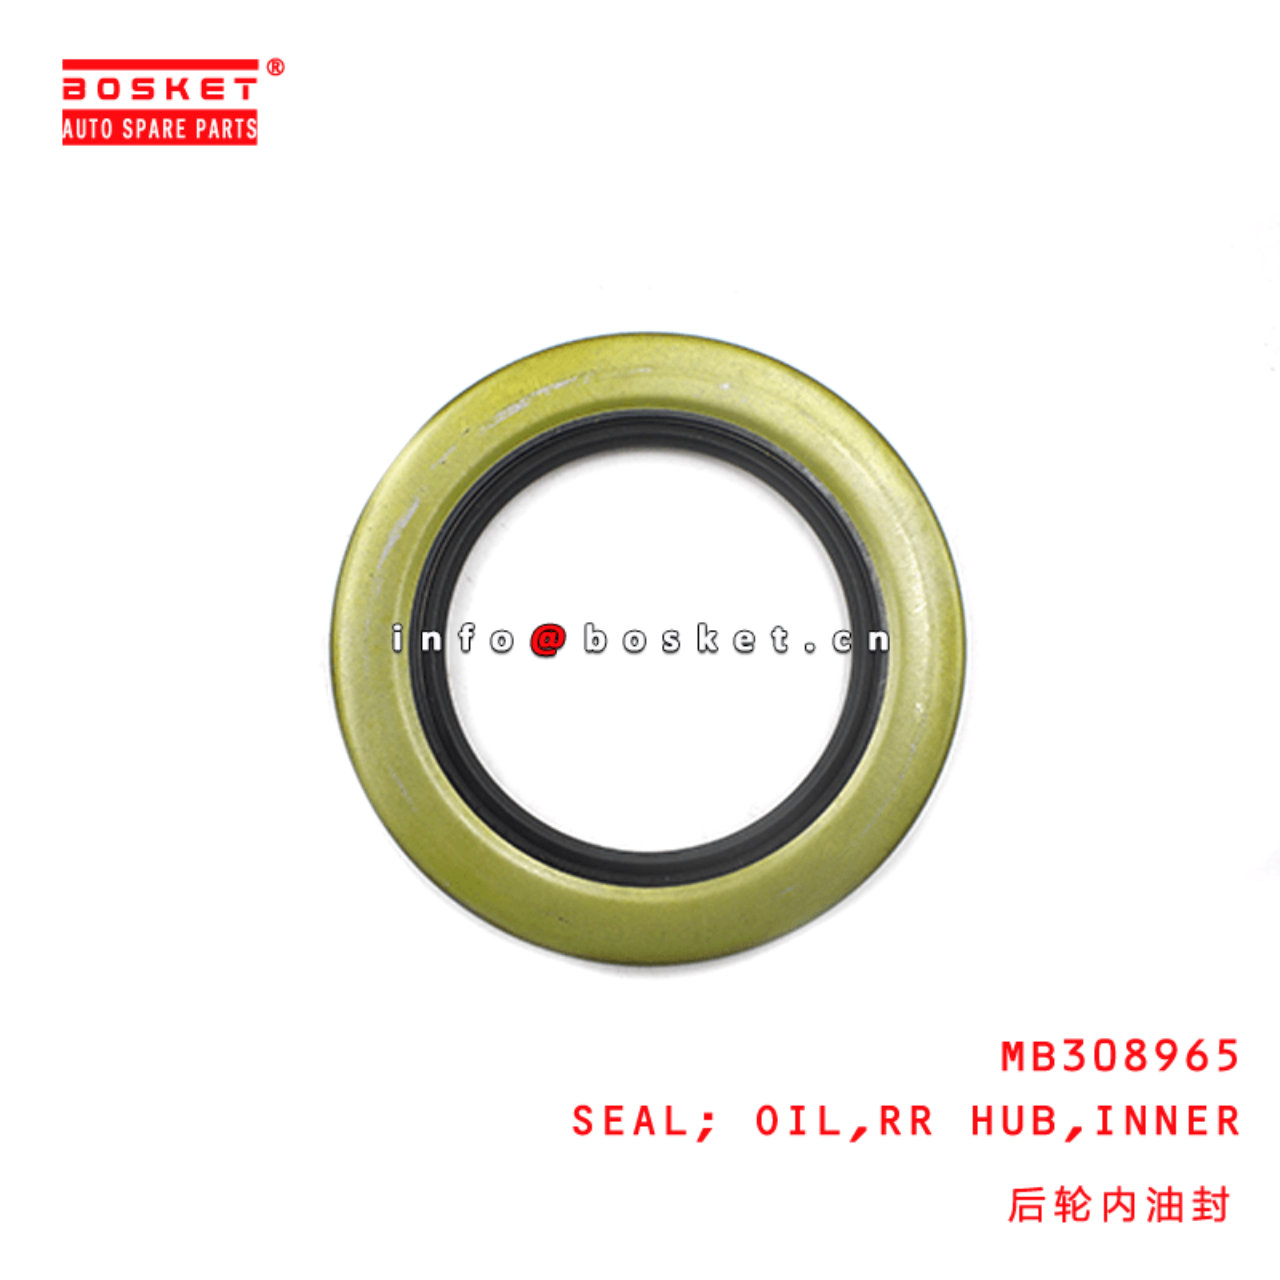 MB308965 Inner Rear Hub Oil Seal Suitable For MITSUBISHI FUSO CANTER RUS